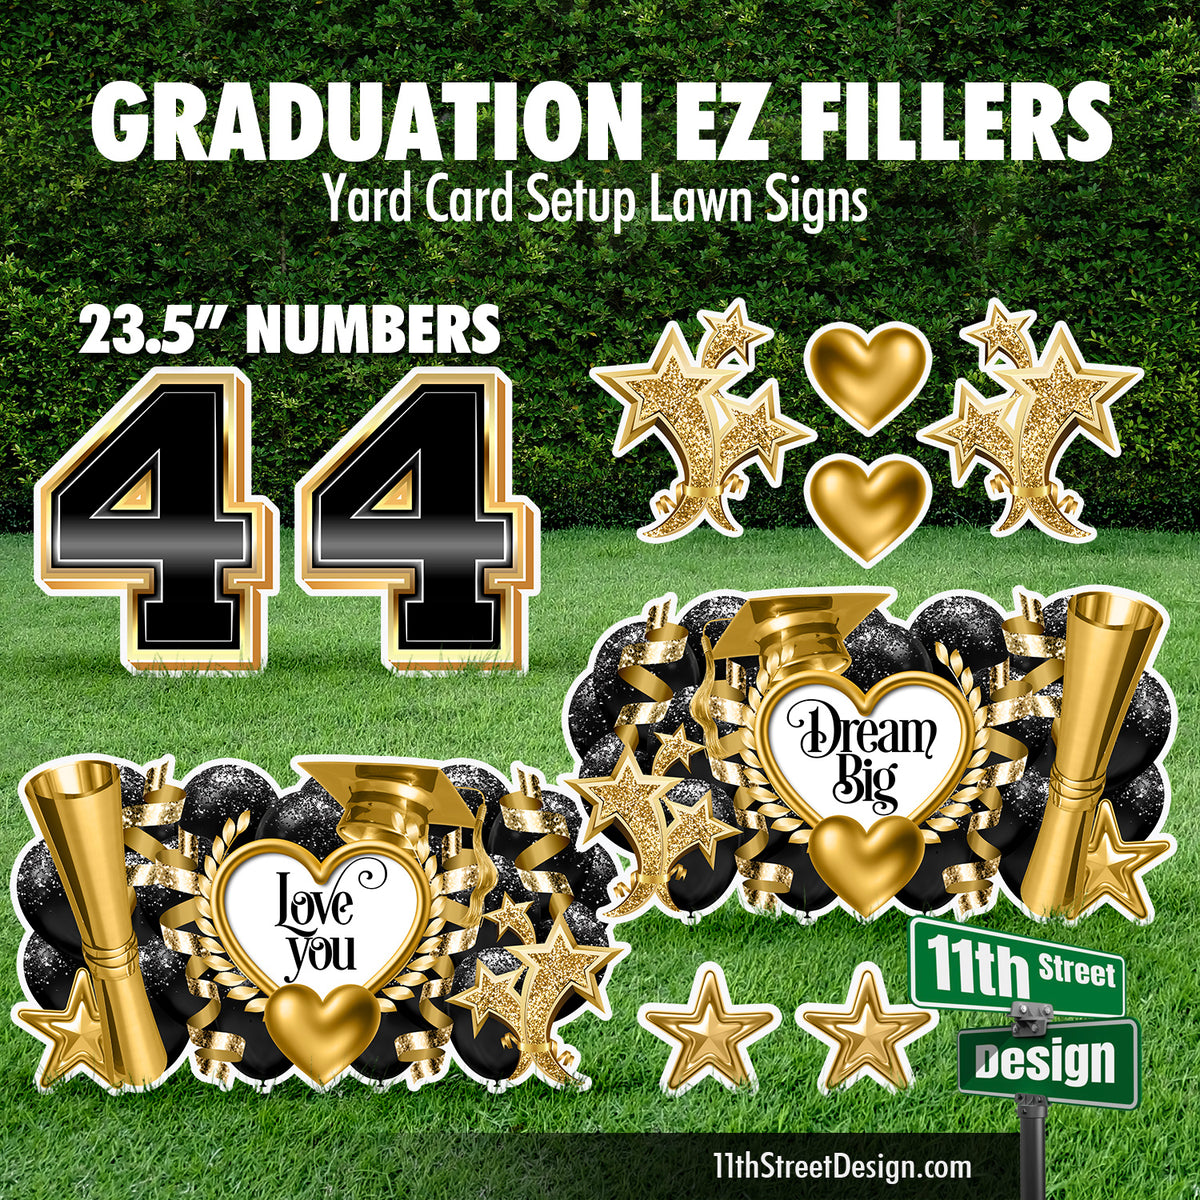 EZ Filler-Grad Heart Quotes and 4s - Yard Card Setup Fillers for Graduation